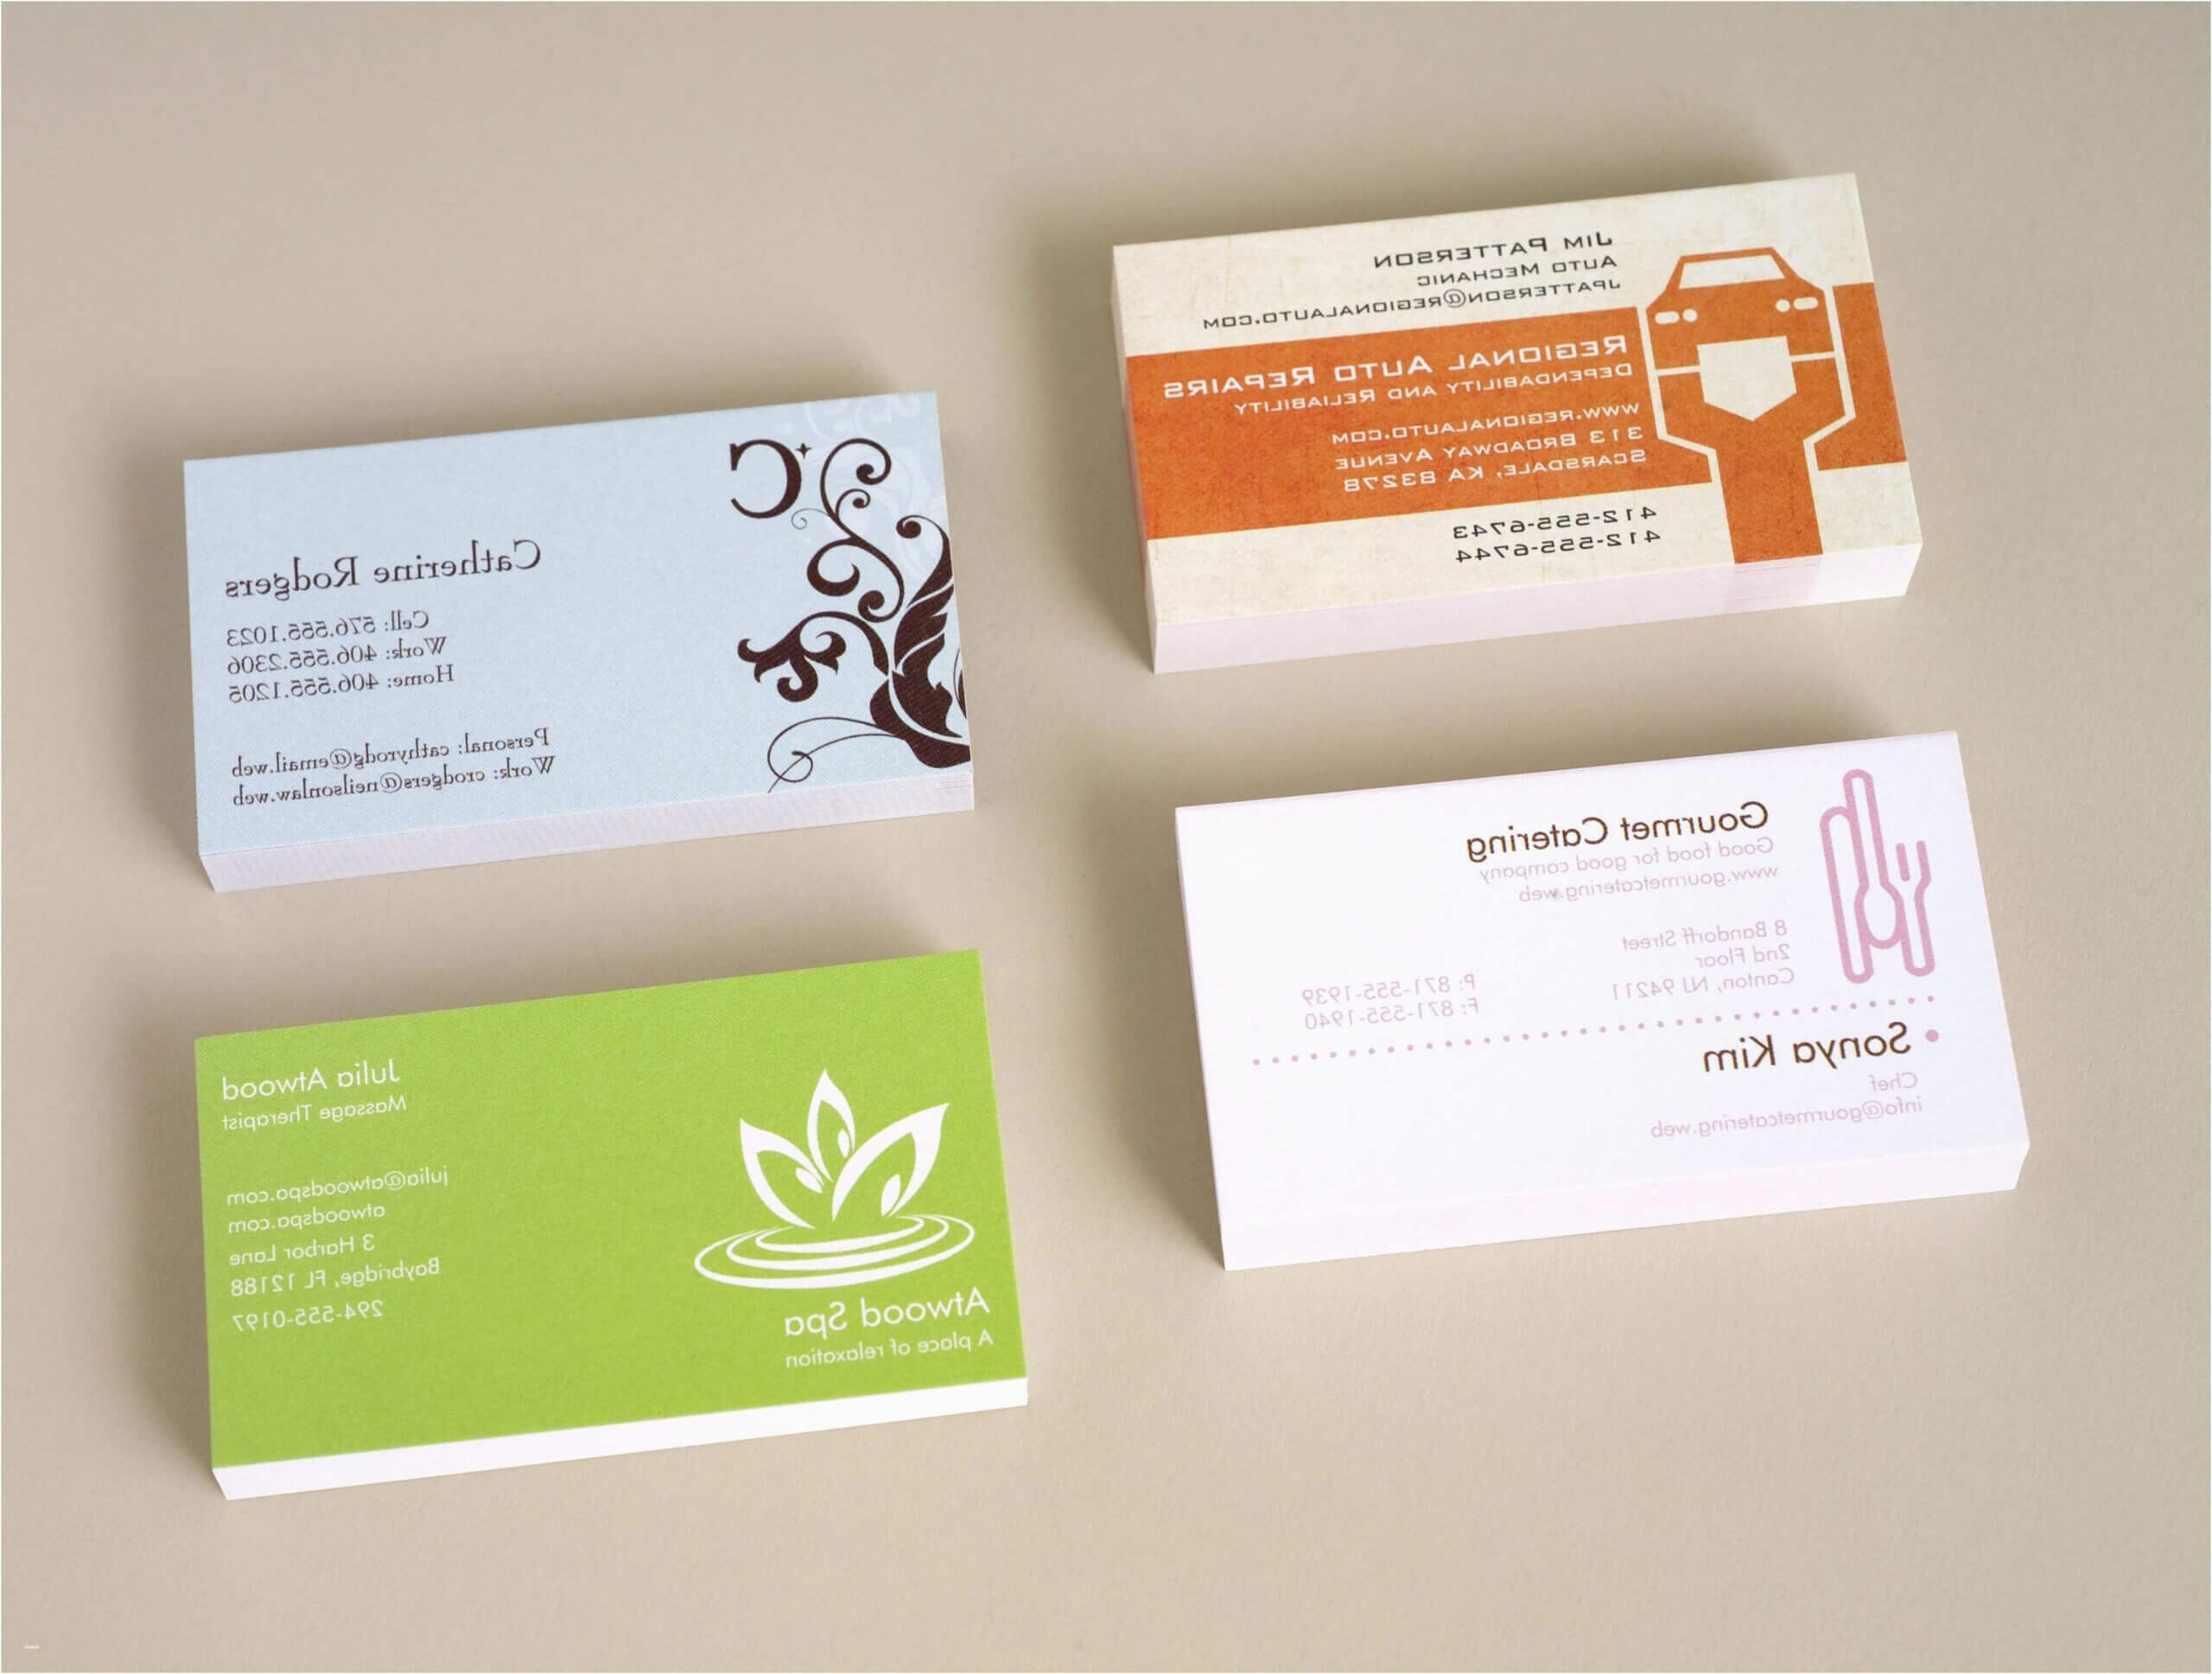 Apocalomegaproductions Regarding Staples Business Card Template